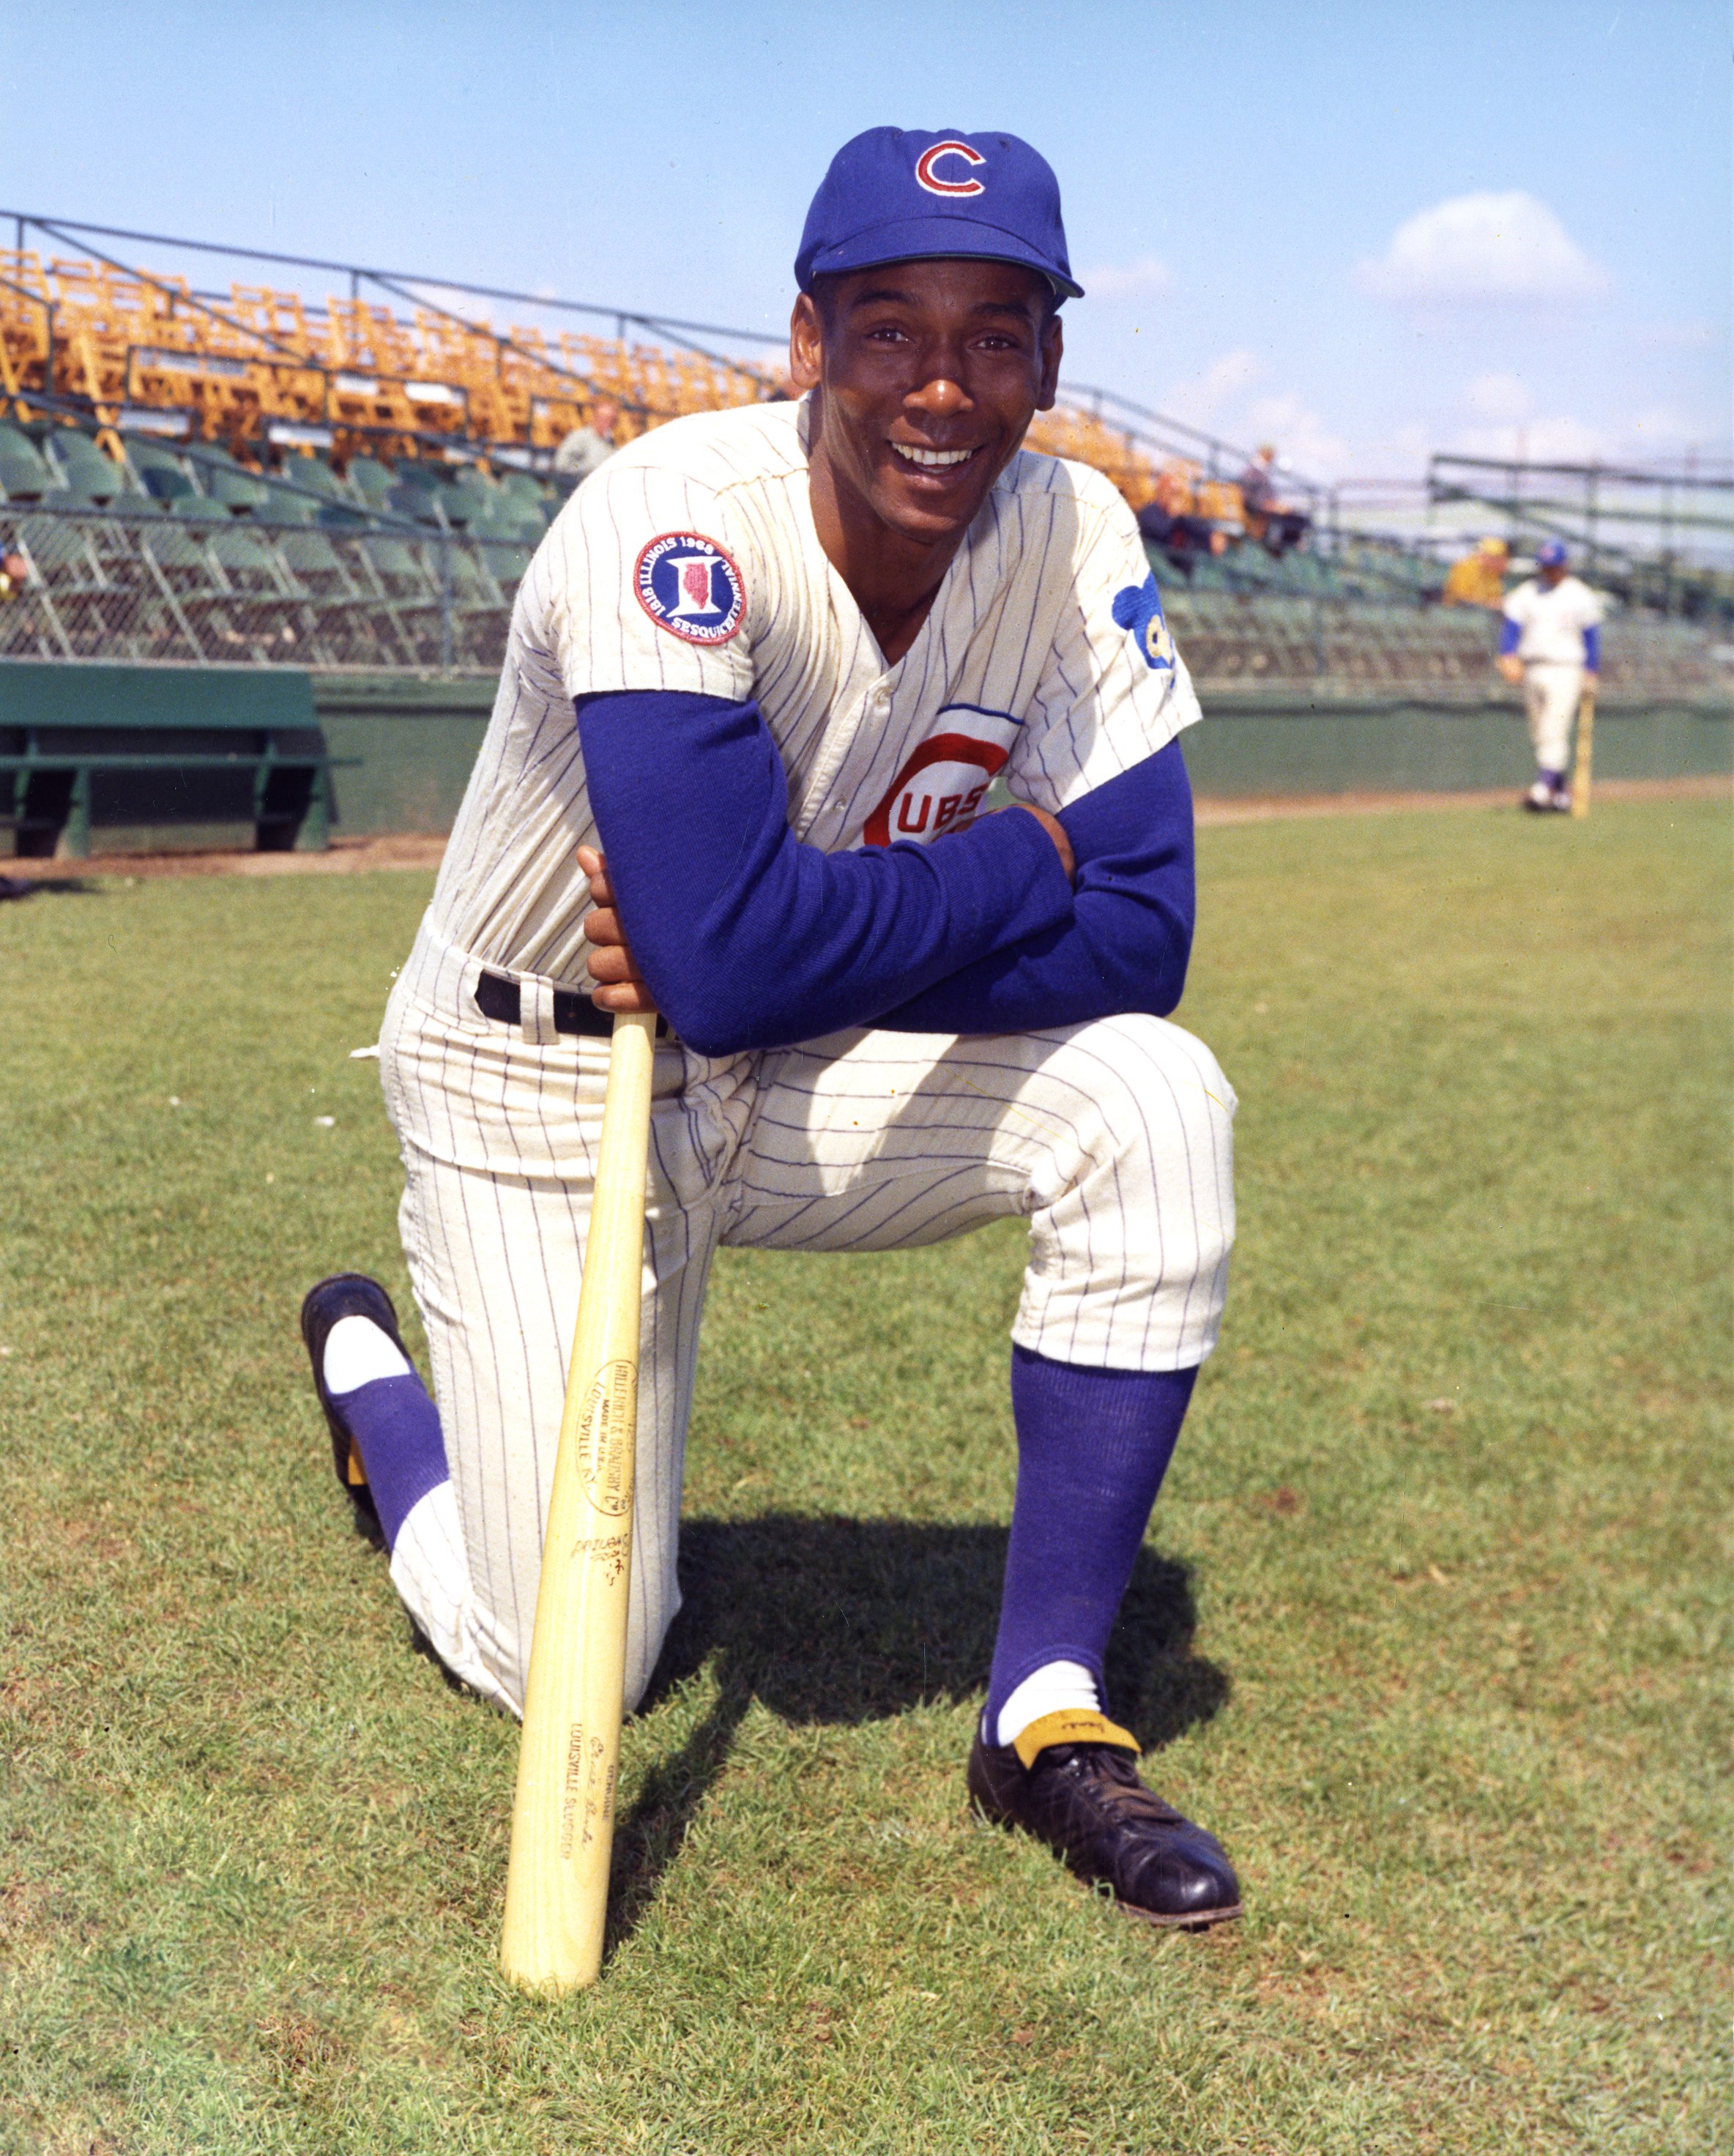 Breathtaking' Ernie Banks Game-Used Jersey Sells For $137,865 at